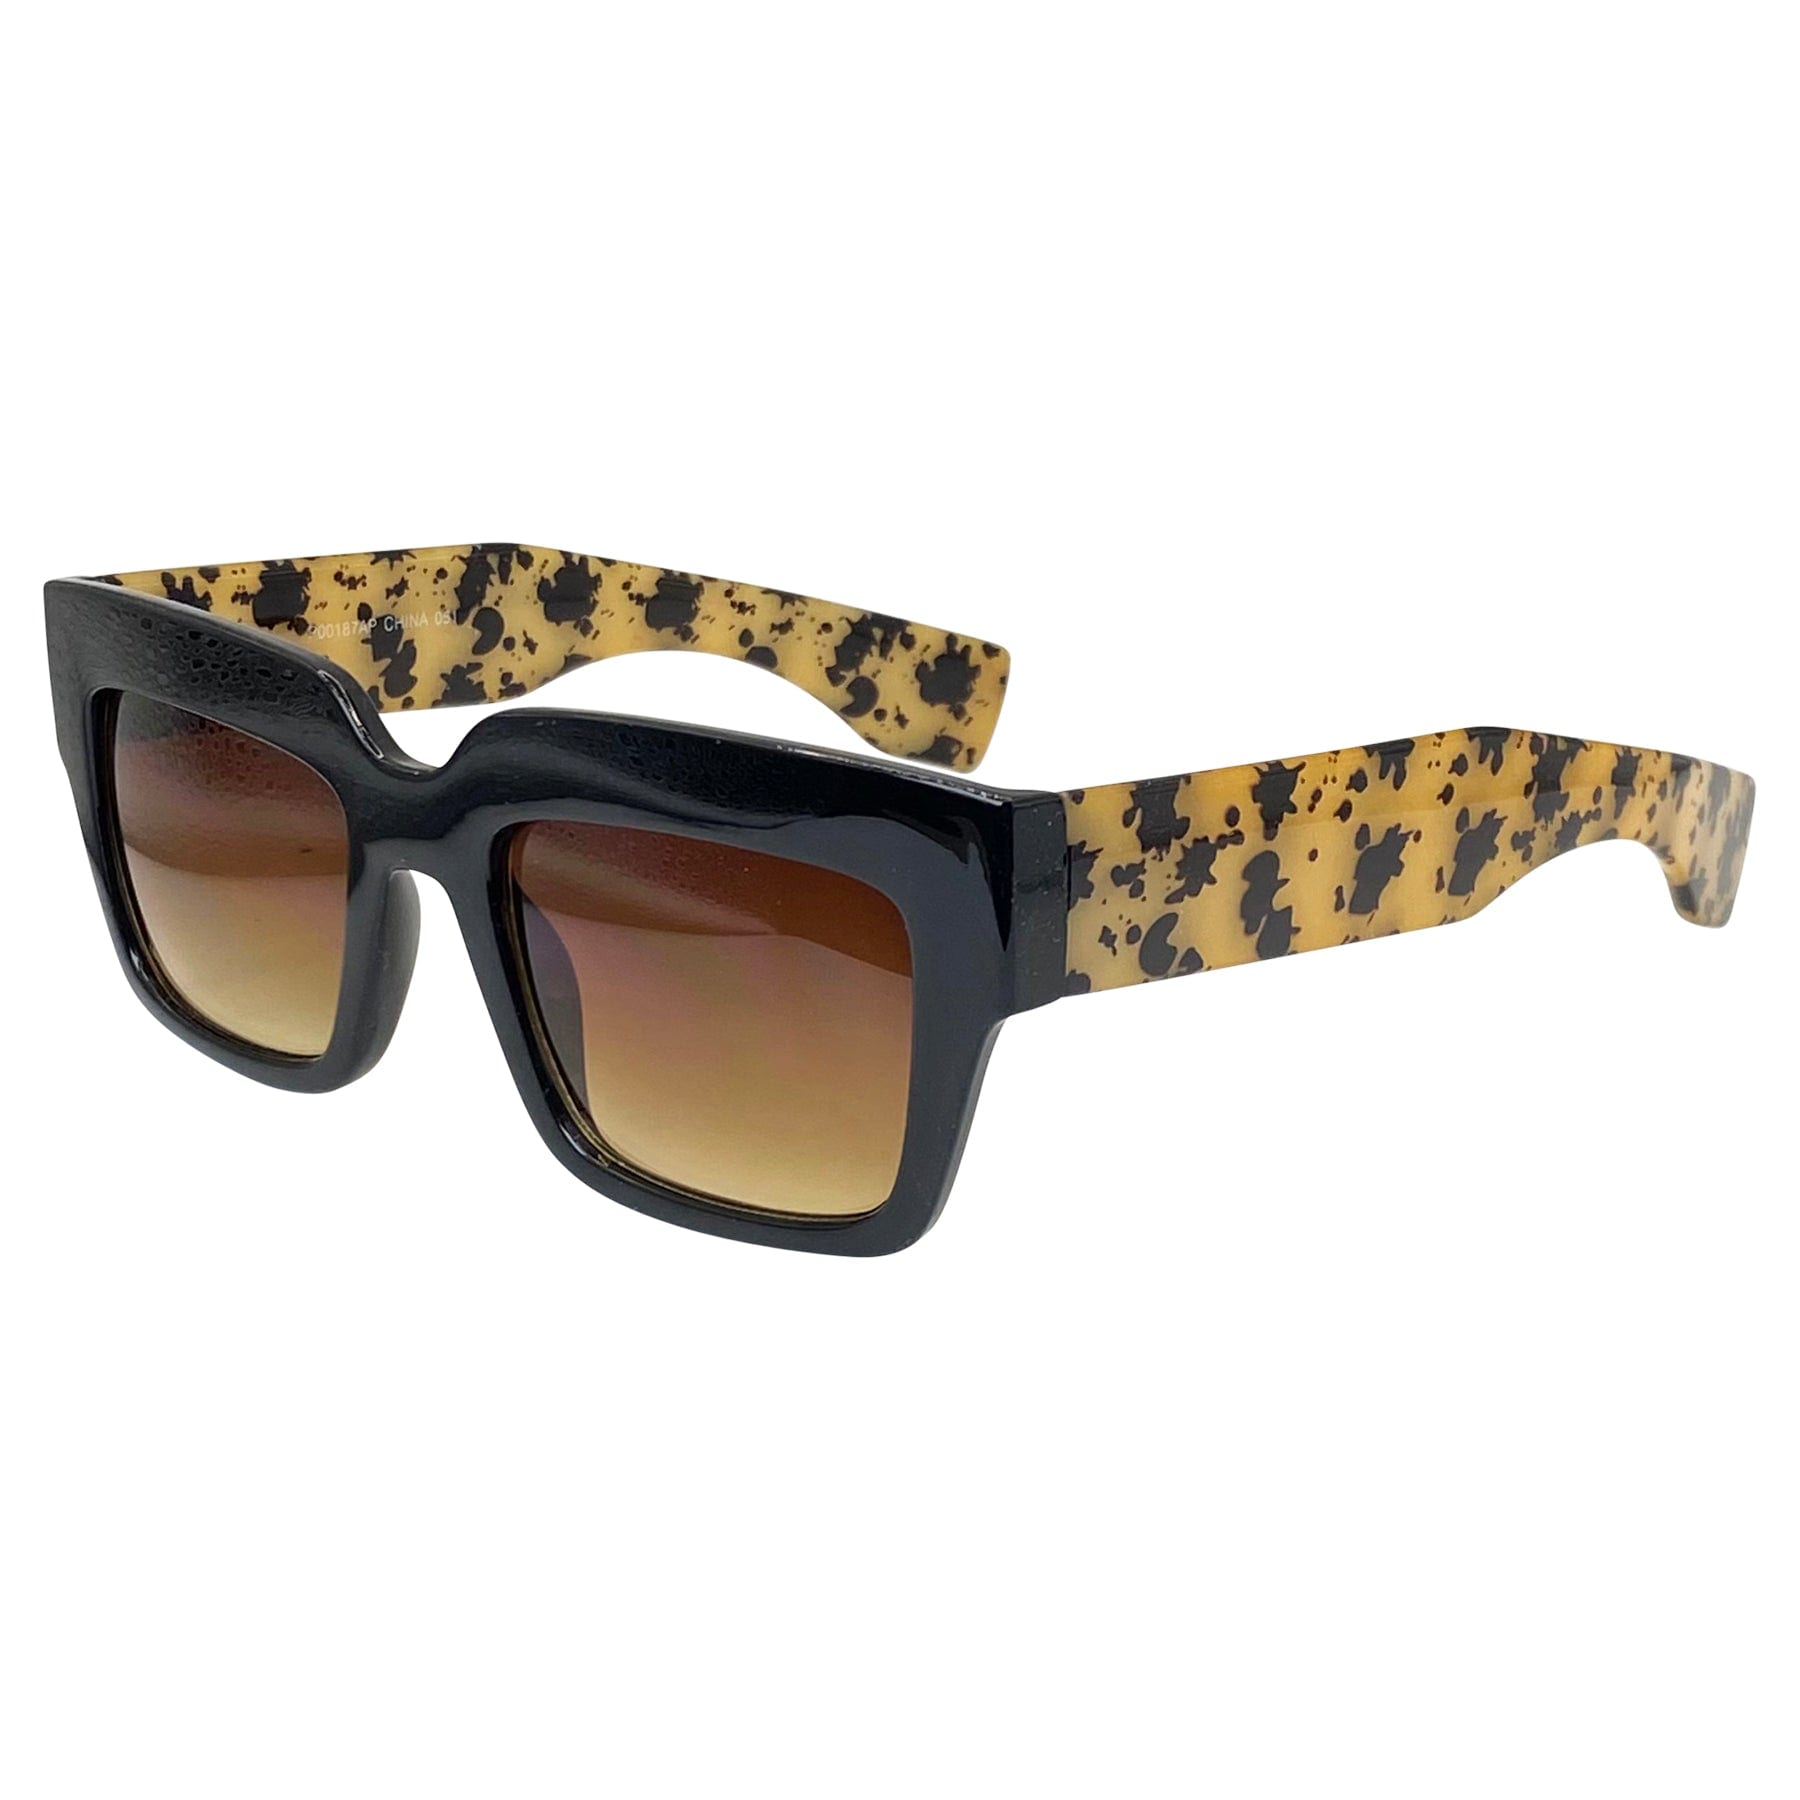 oversized square sunglasses for men and unisex with a mod style frame